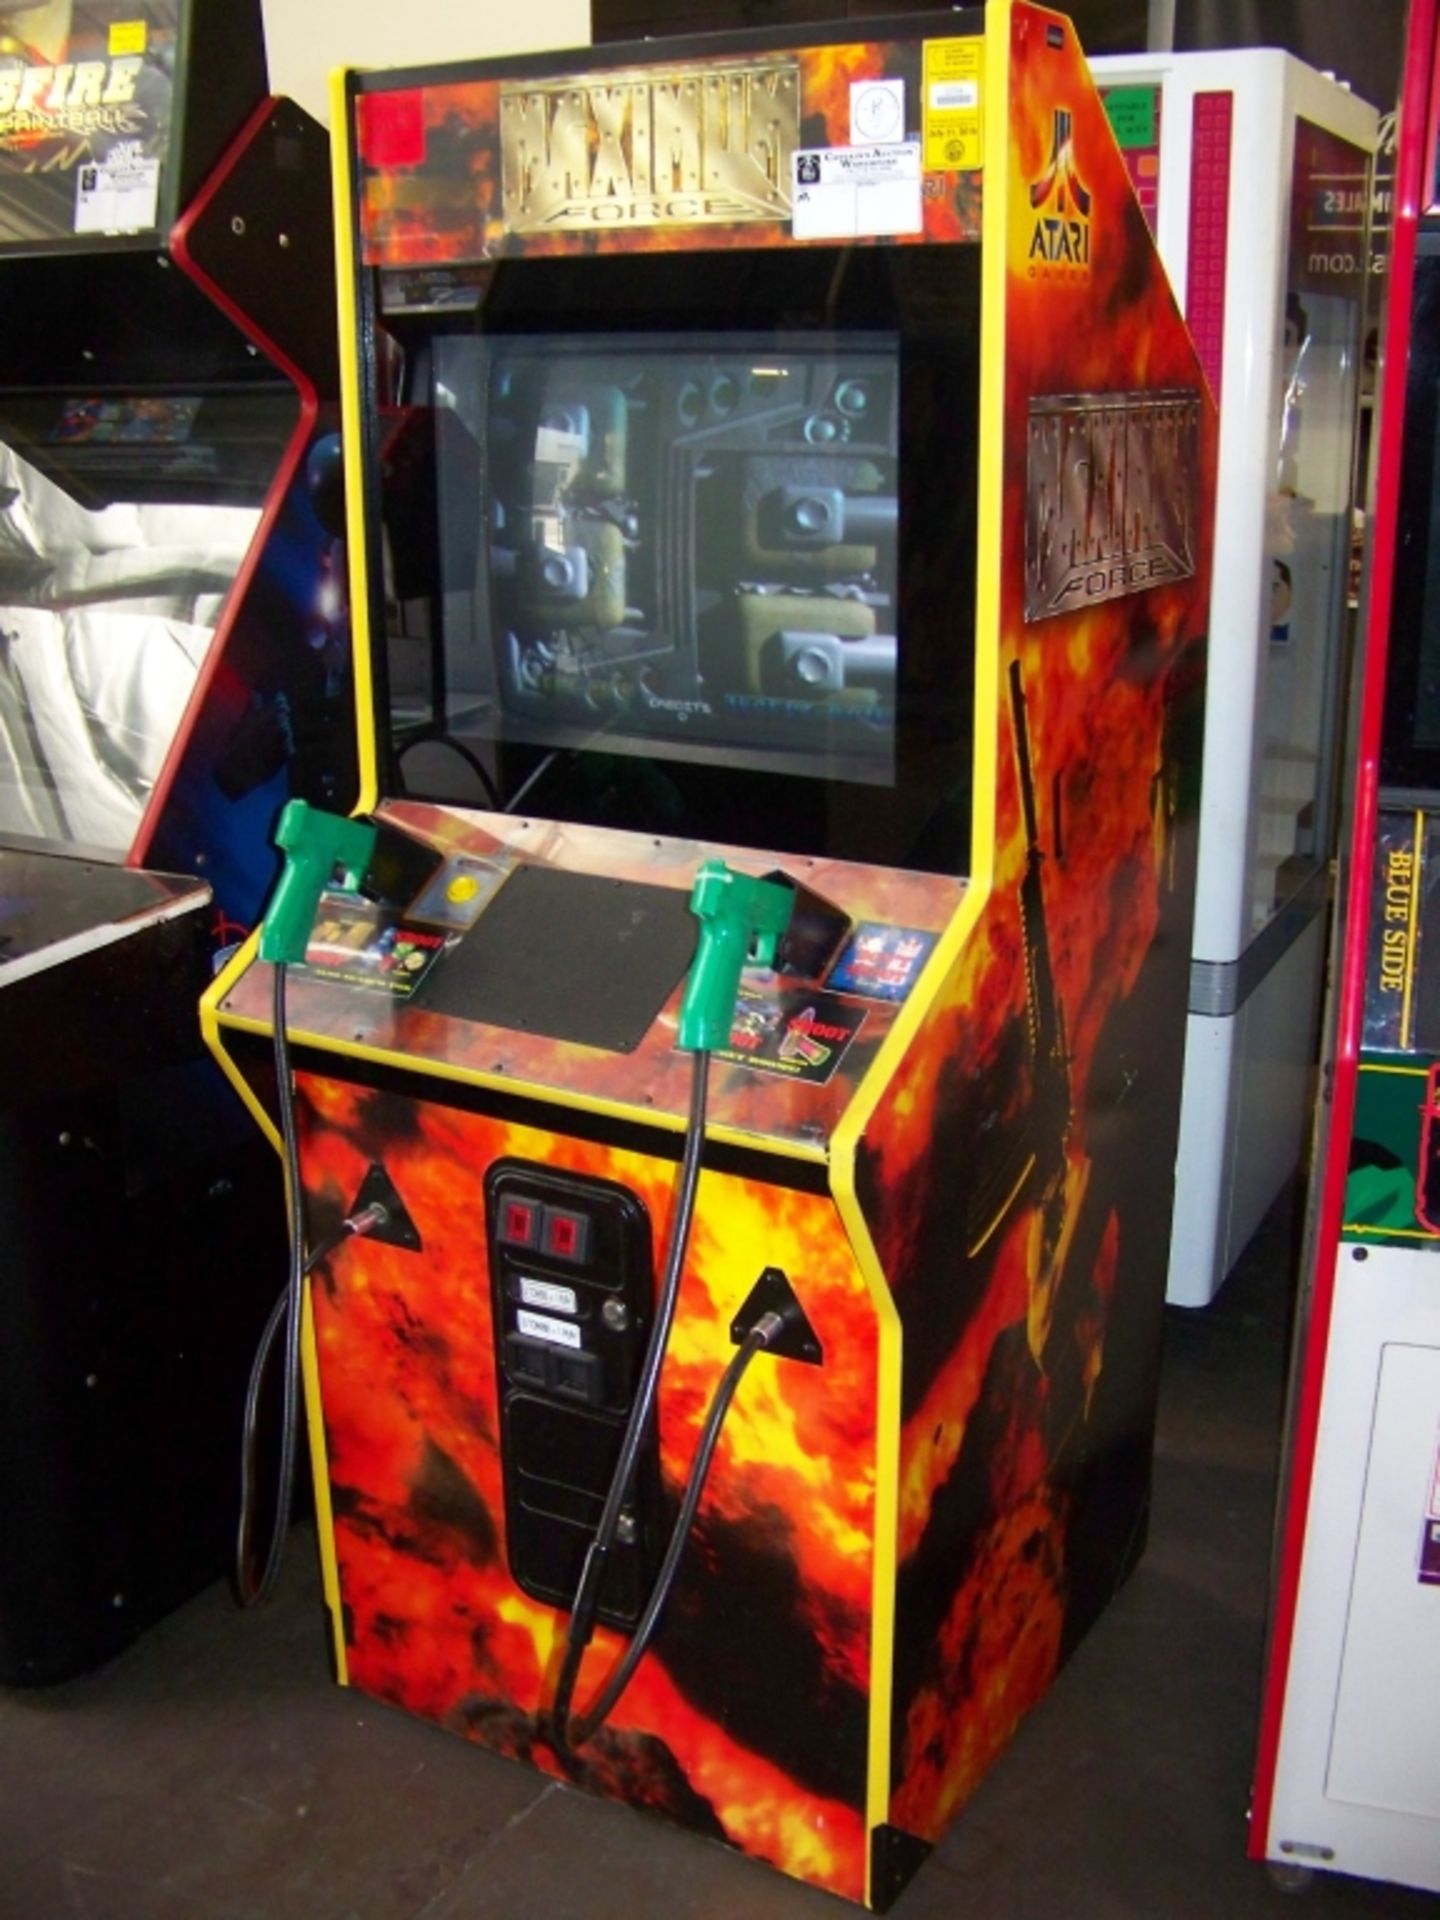 MAXIMUM FORCE DEDICATED SHOOTER ARCADE GAME M Item is in used condition. Evidence of wear and - Image 3 of 7